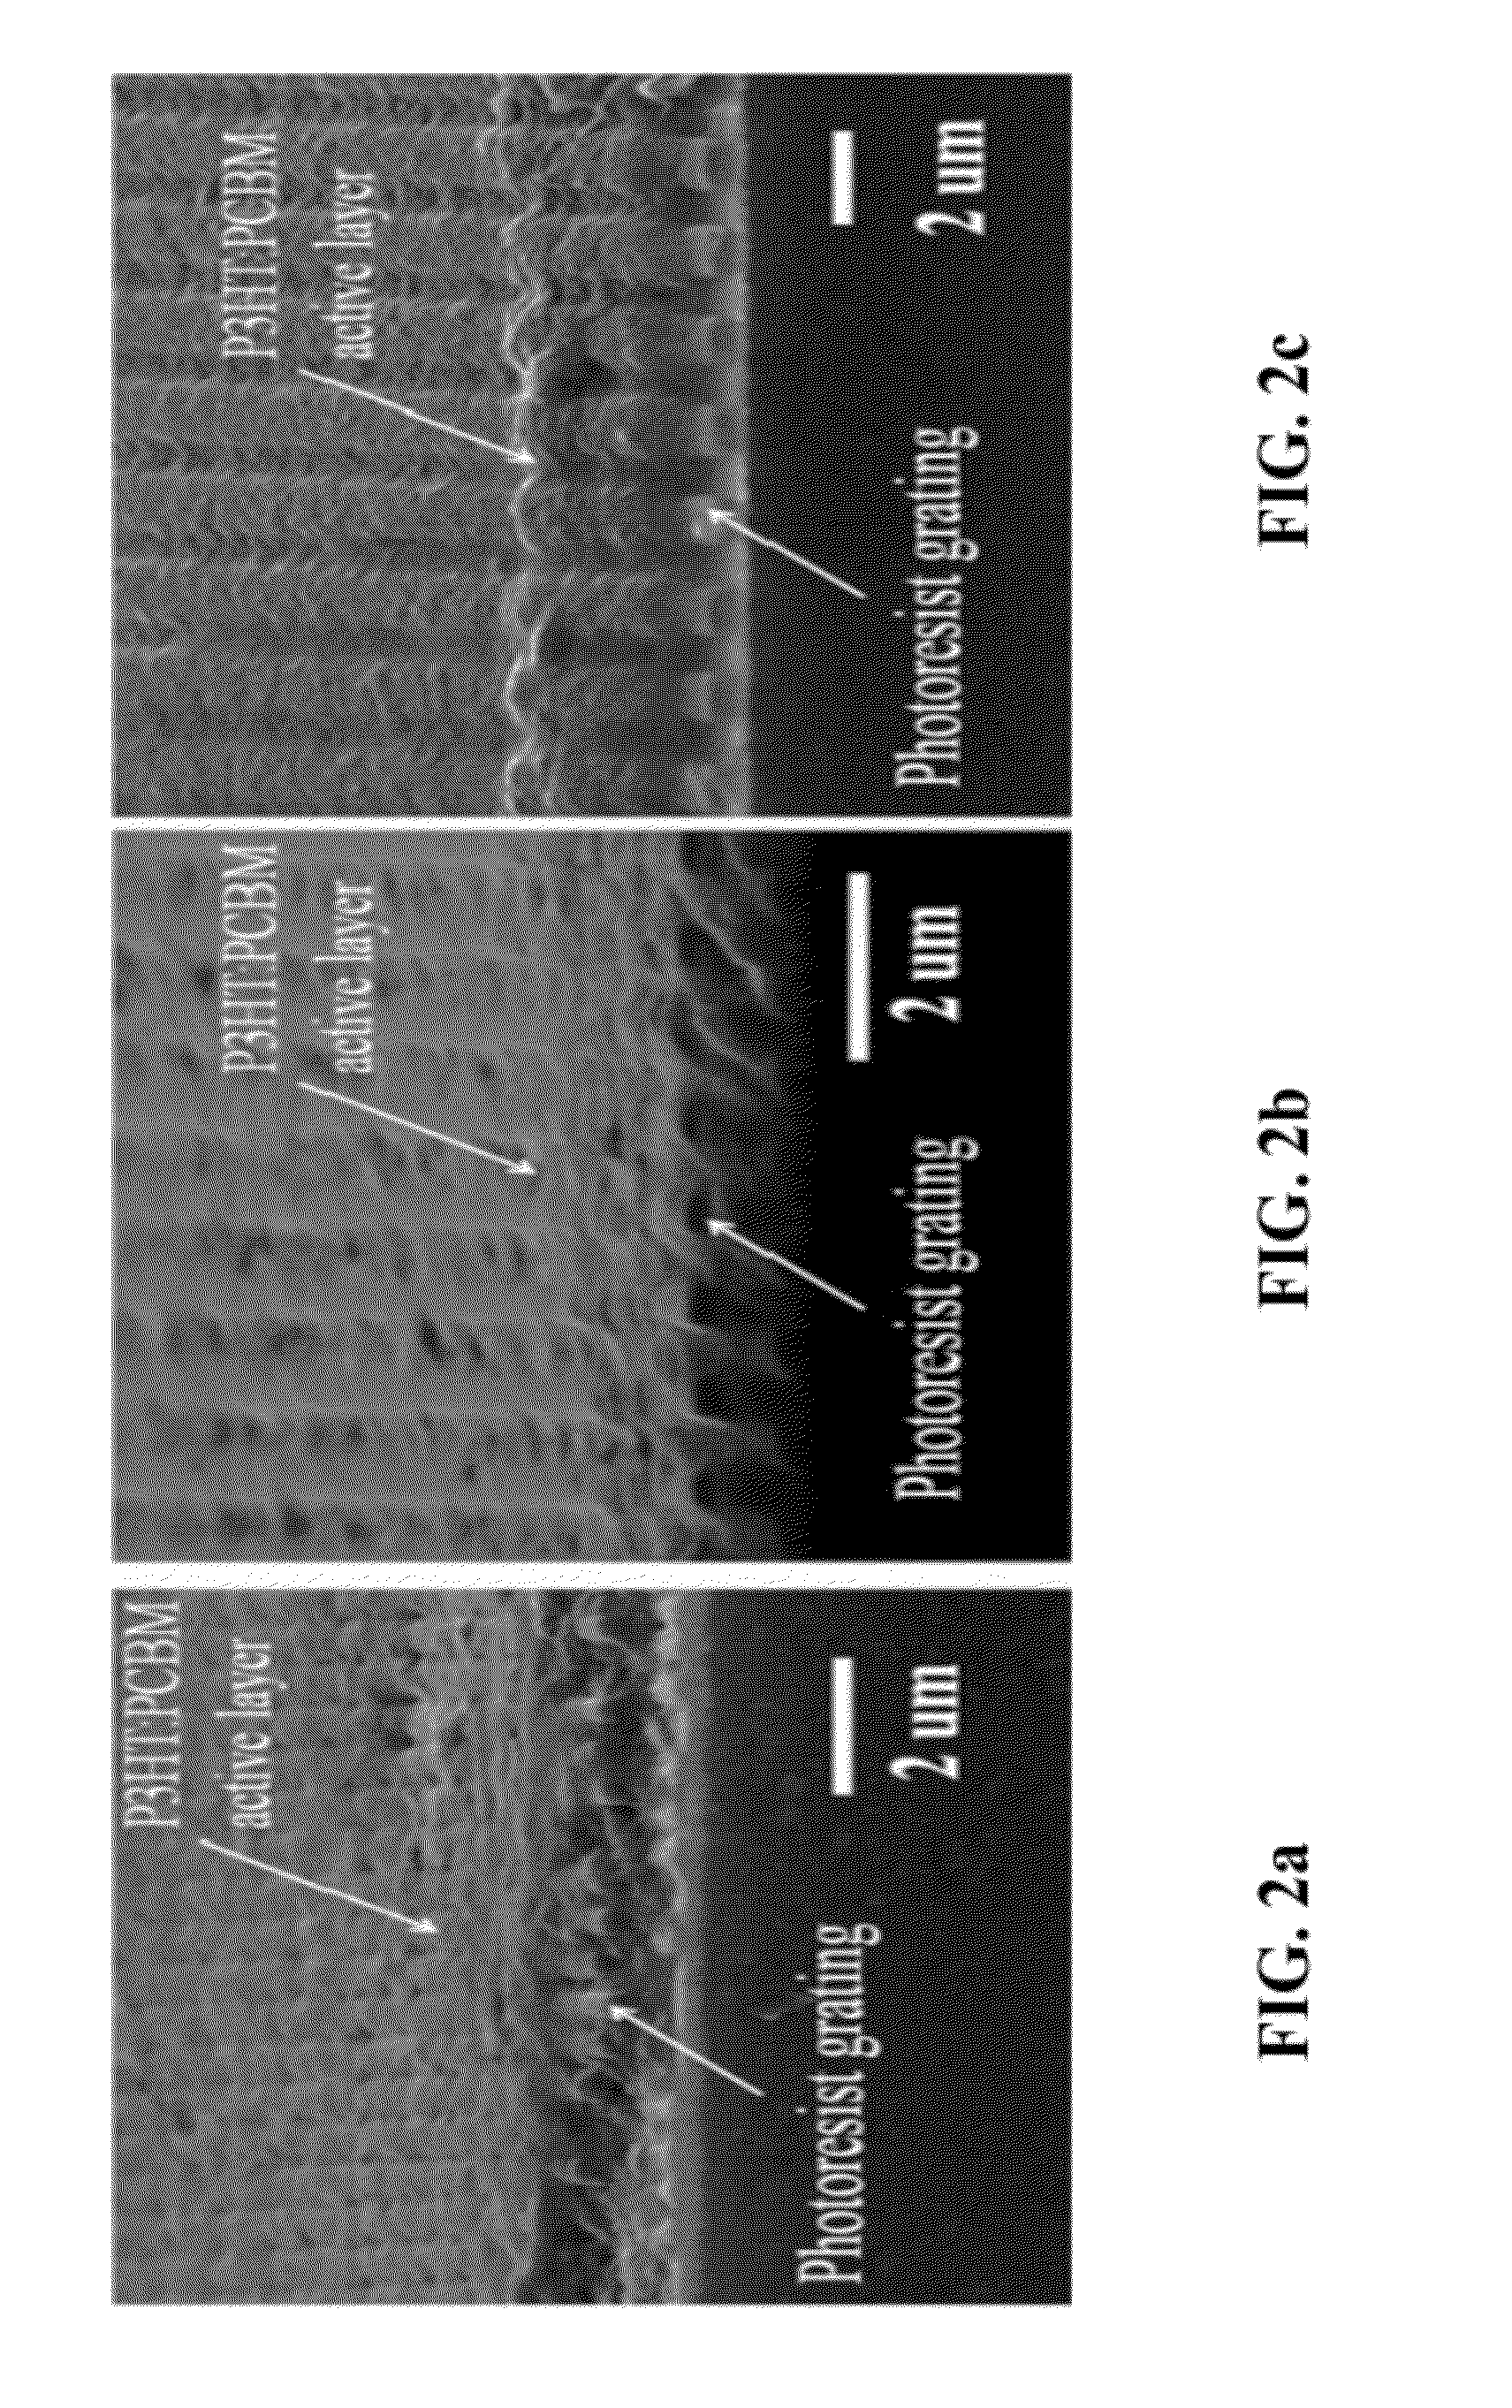 Textured Micrometer Scale Templates as Light Managing Fabrication Platform for Organic Solar Cells